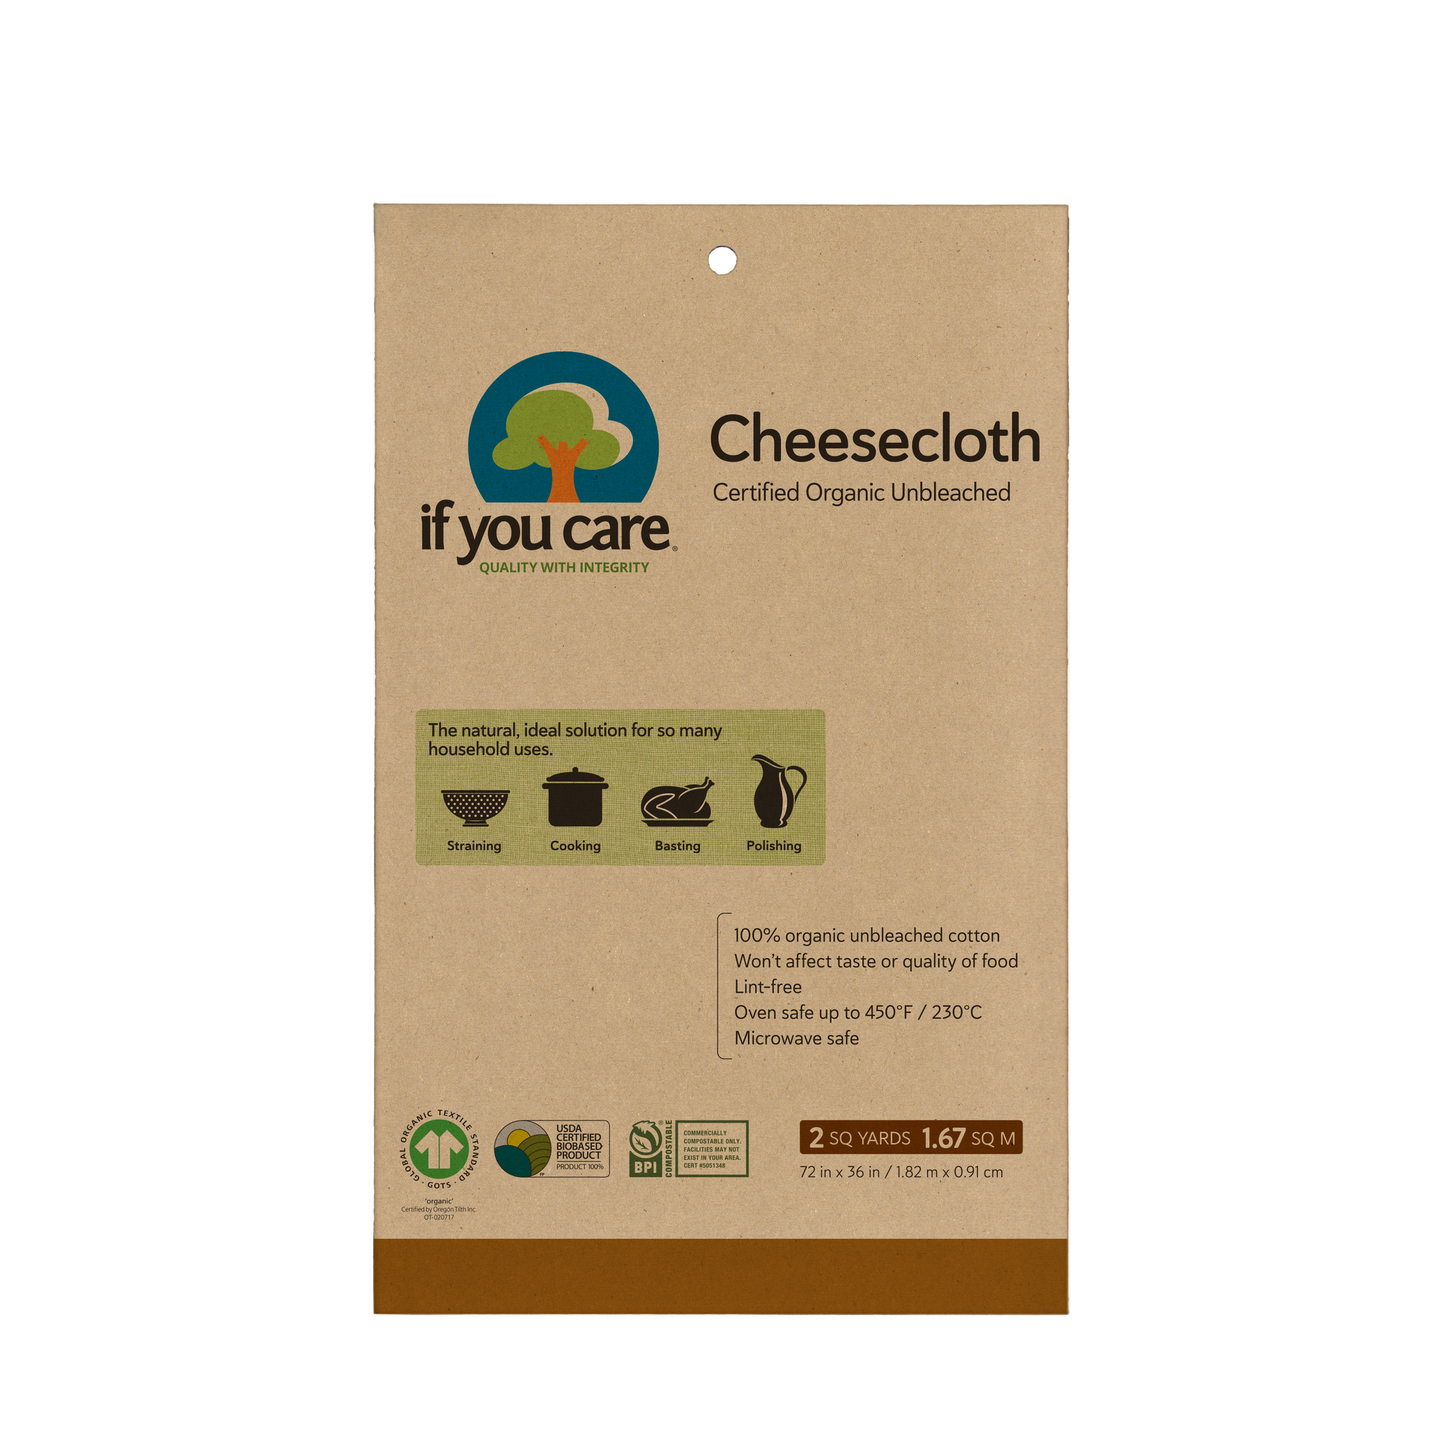 If You Care - Certified Organic Unbleached Cheesecloth If You Care